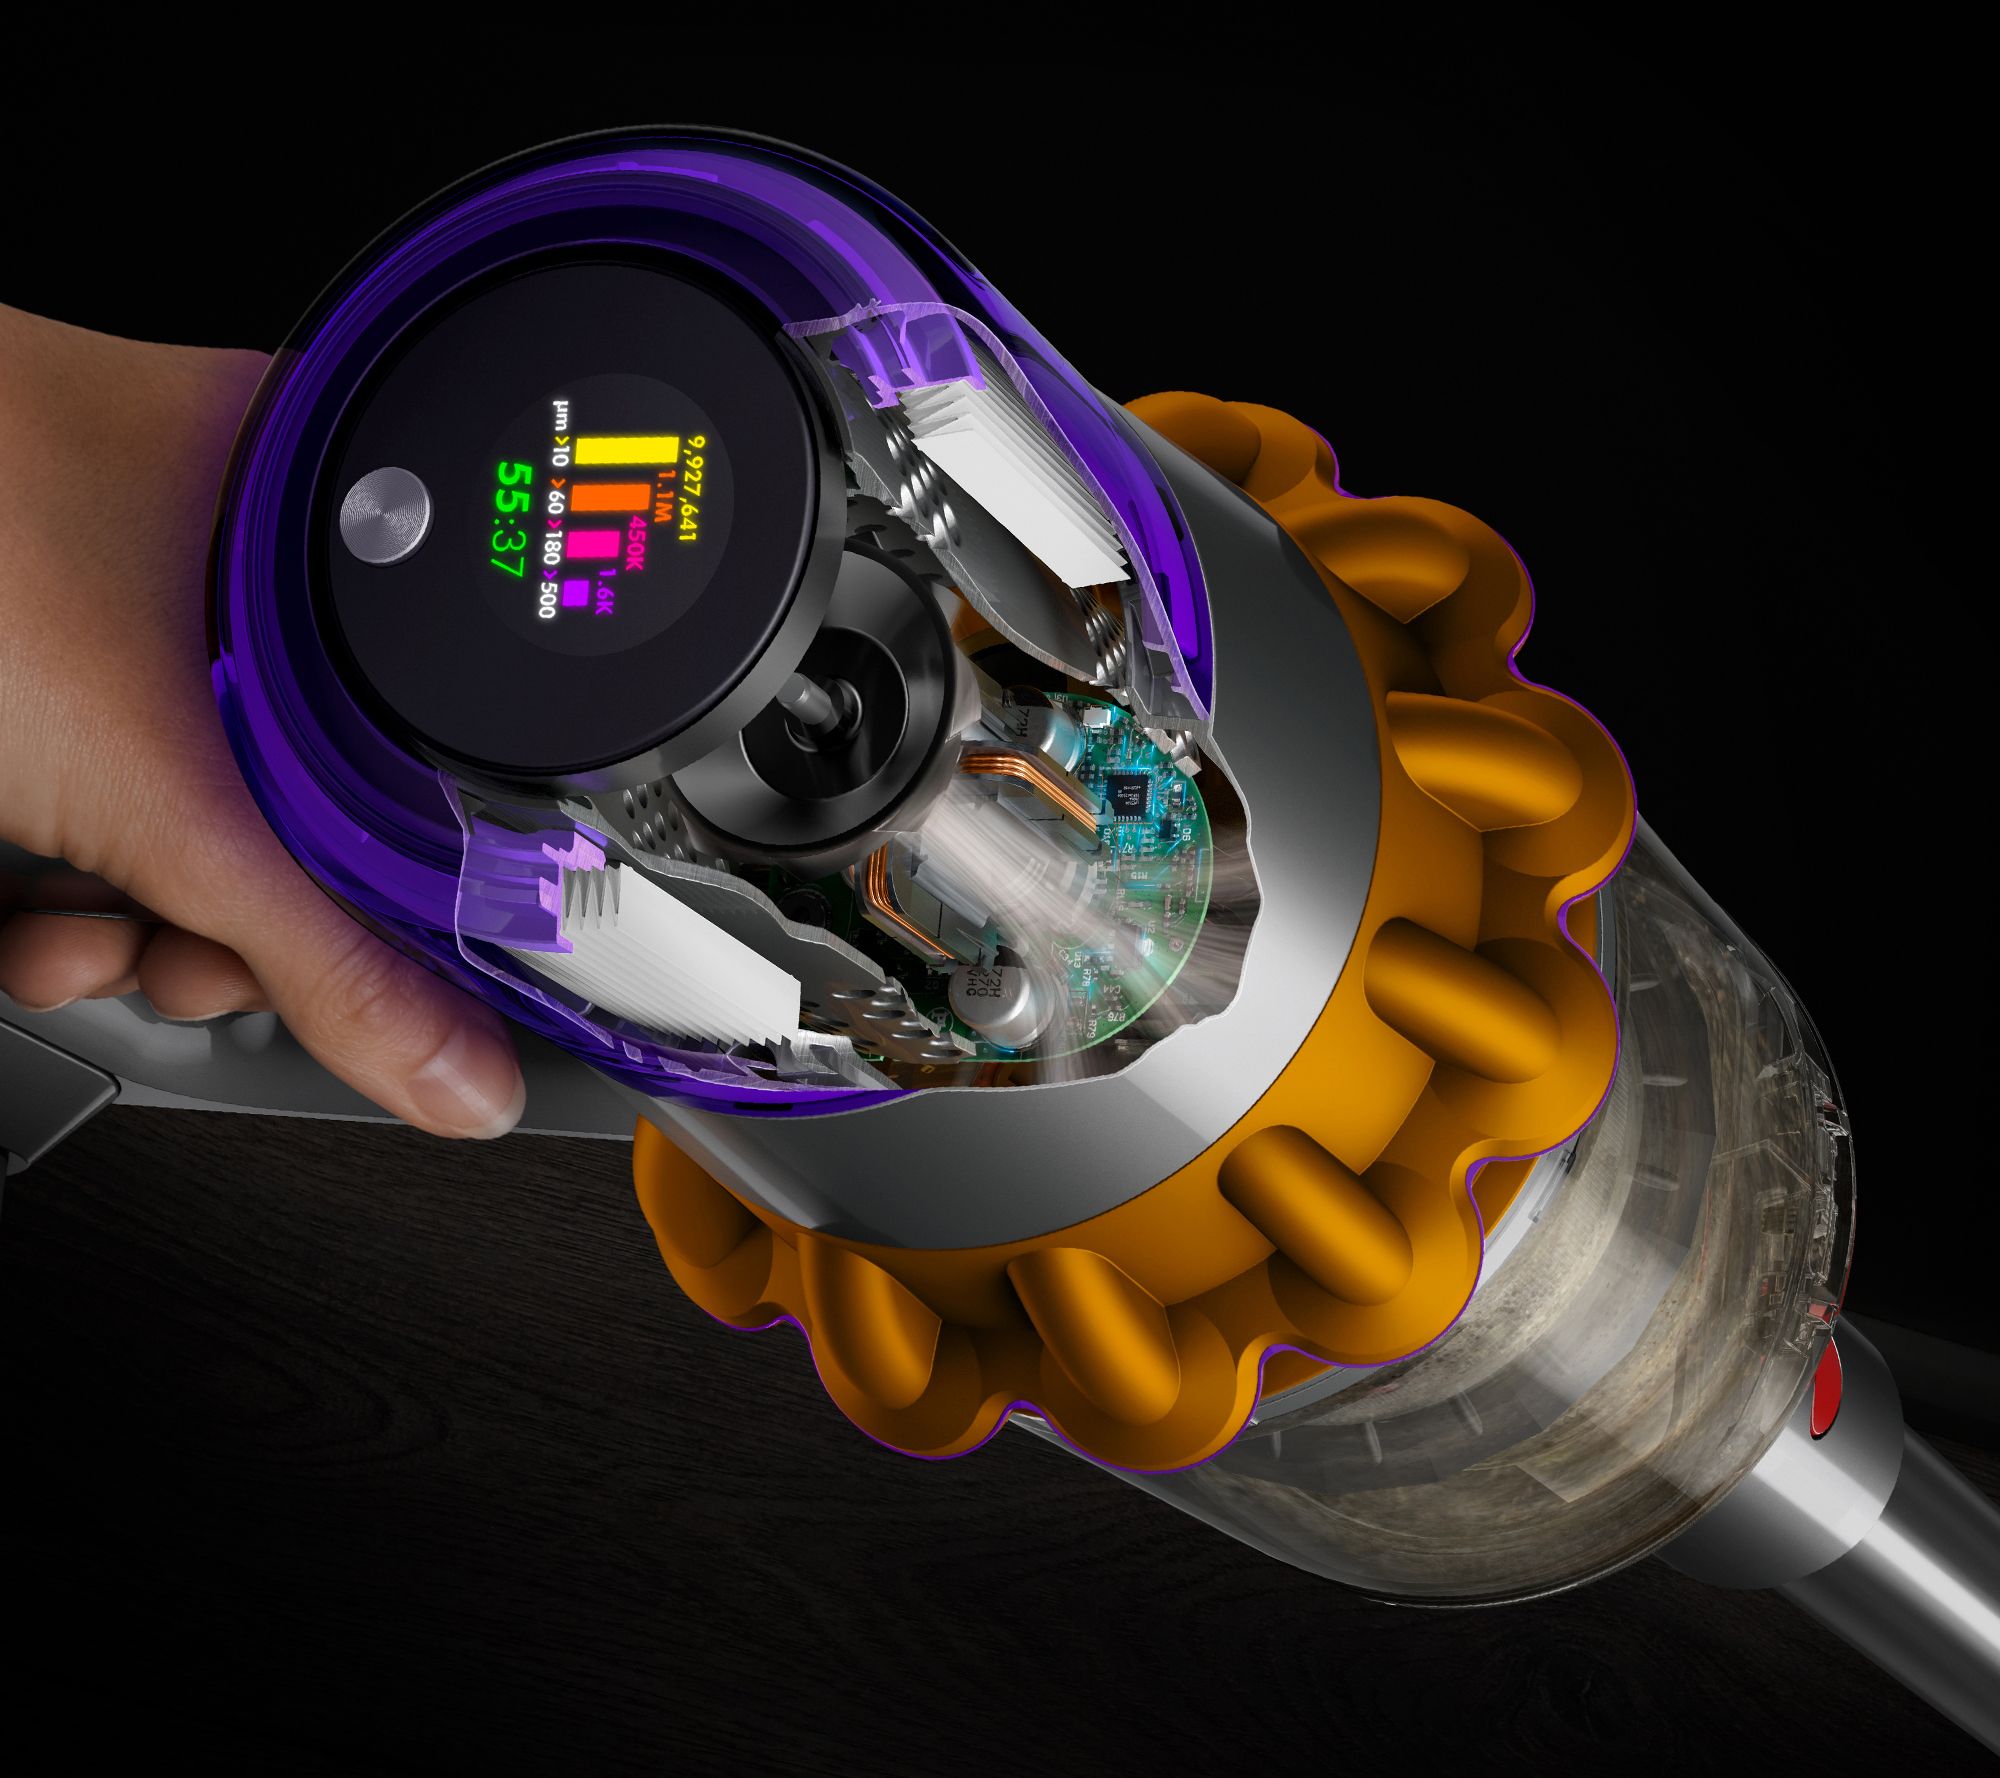 Dyson V15 Detailed Review - Part 1: Product and Accessories Overview 